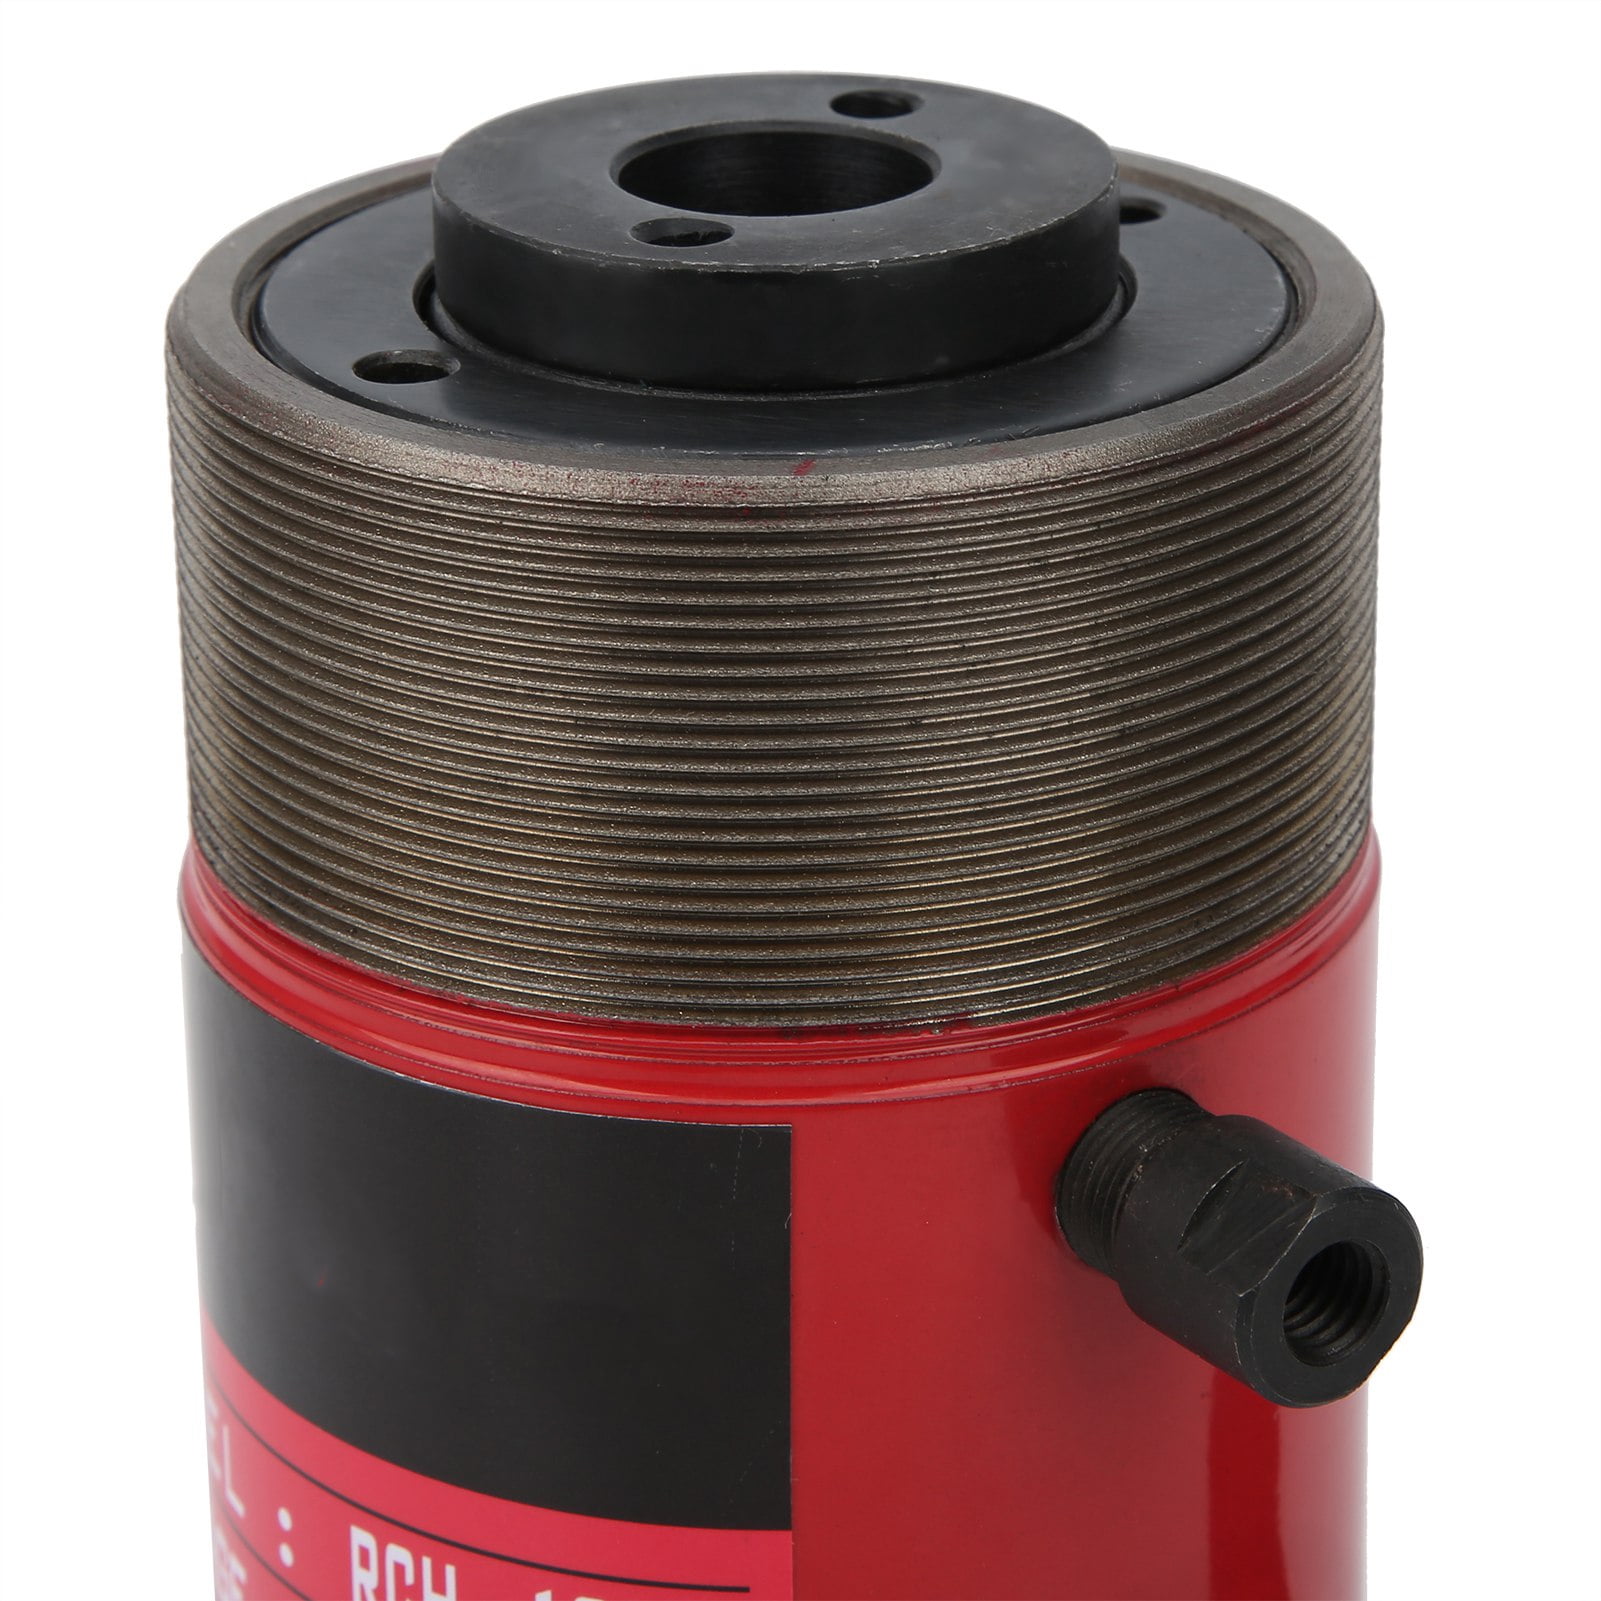 Hydraulic Cylinder 14T Separate Hollow Hole Plunger Power Tool 50mm Stroke Red 